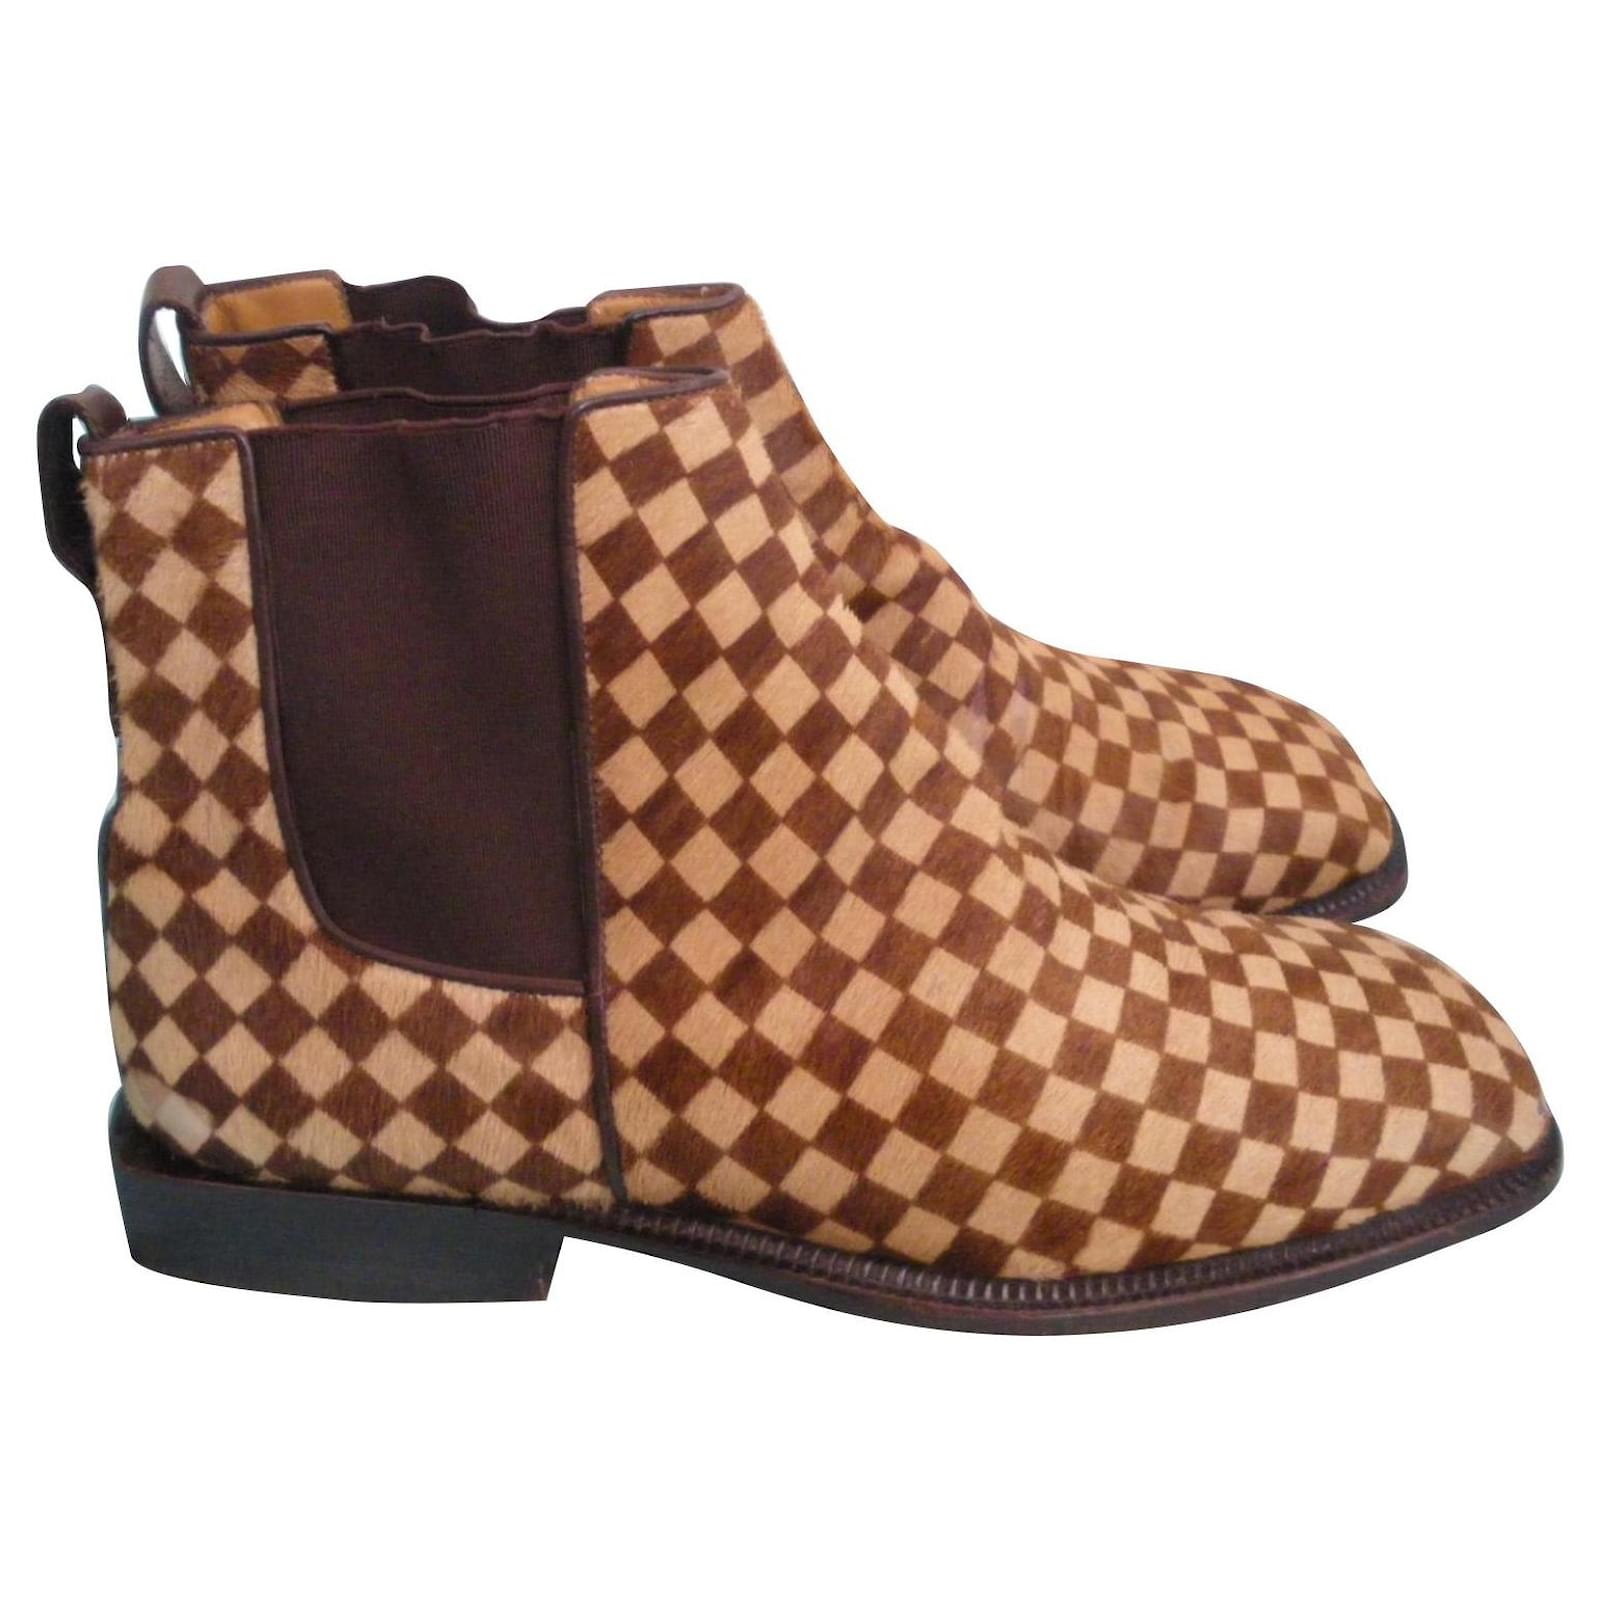 Louis Vuitton boots in damier ebene calf-hair Brown Leather ref